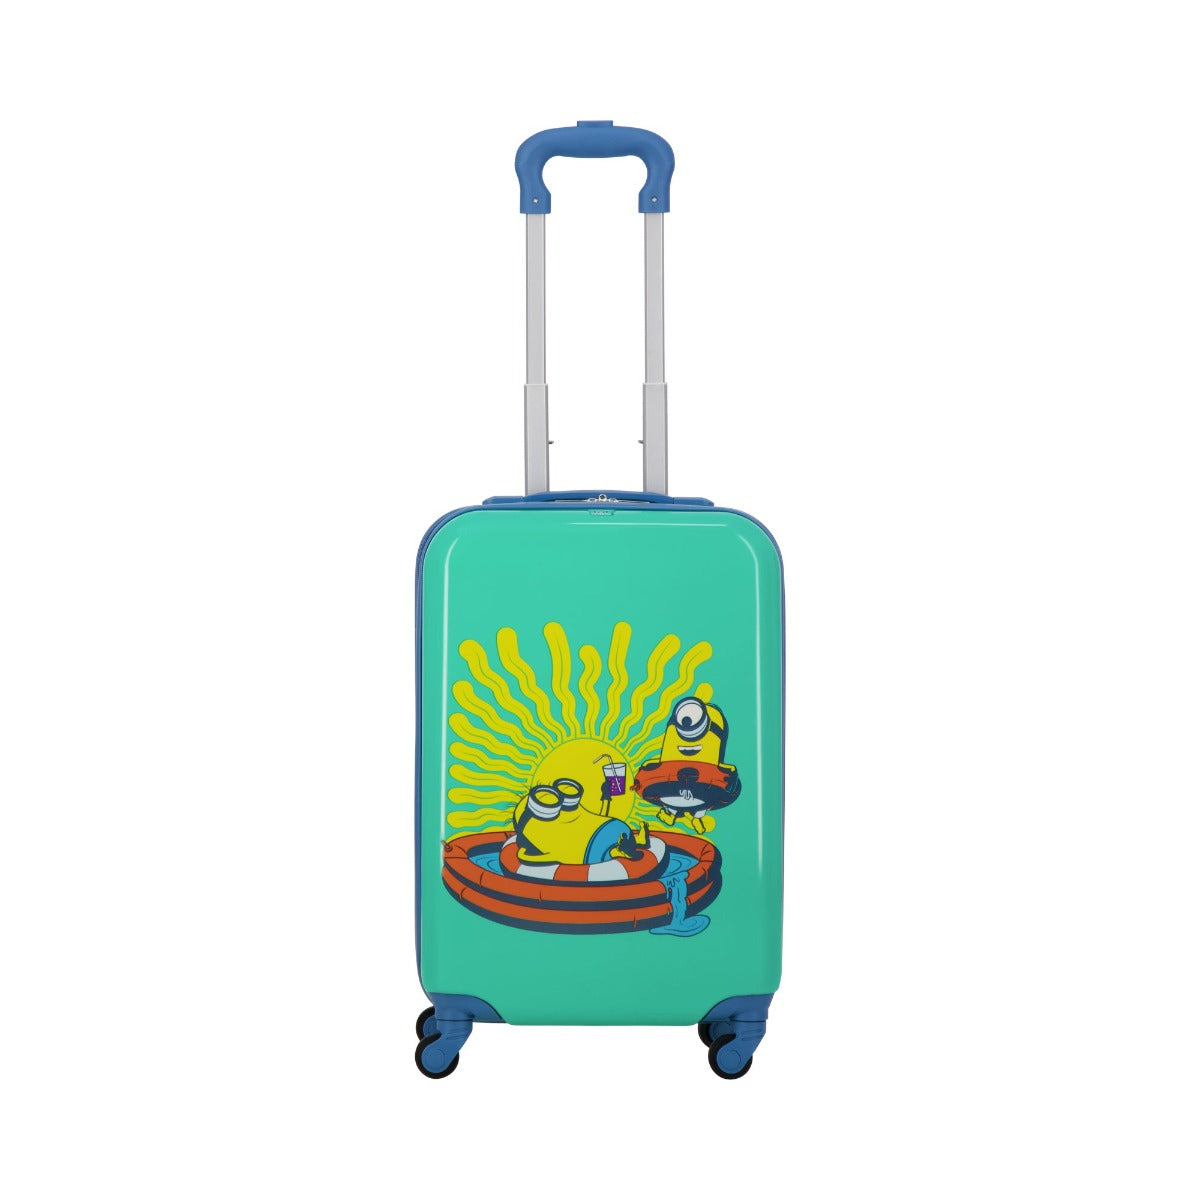 Ful Minions Vacation 21" carry-on suitcase for kids travel